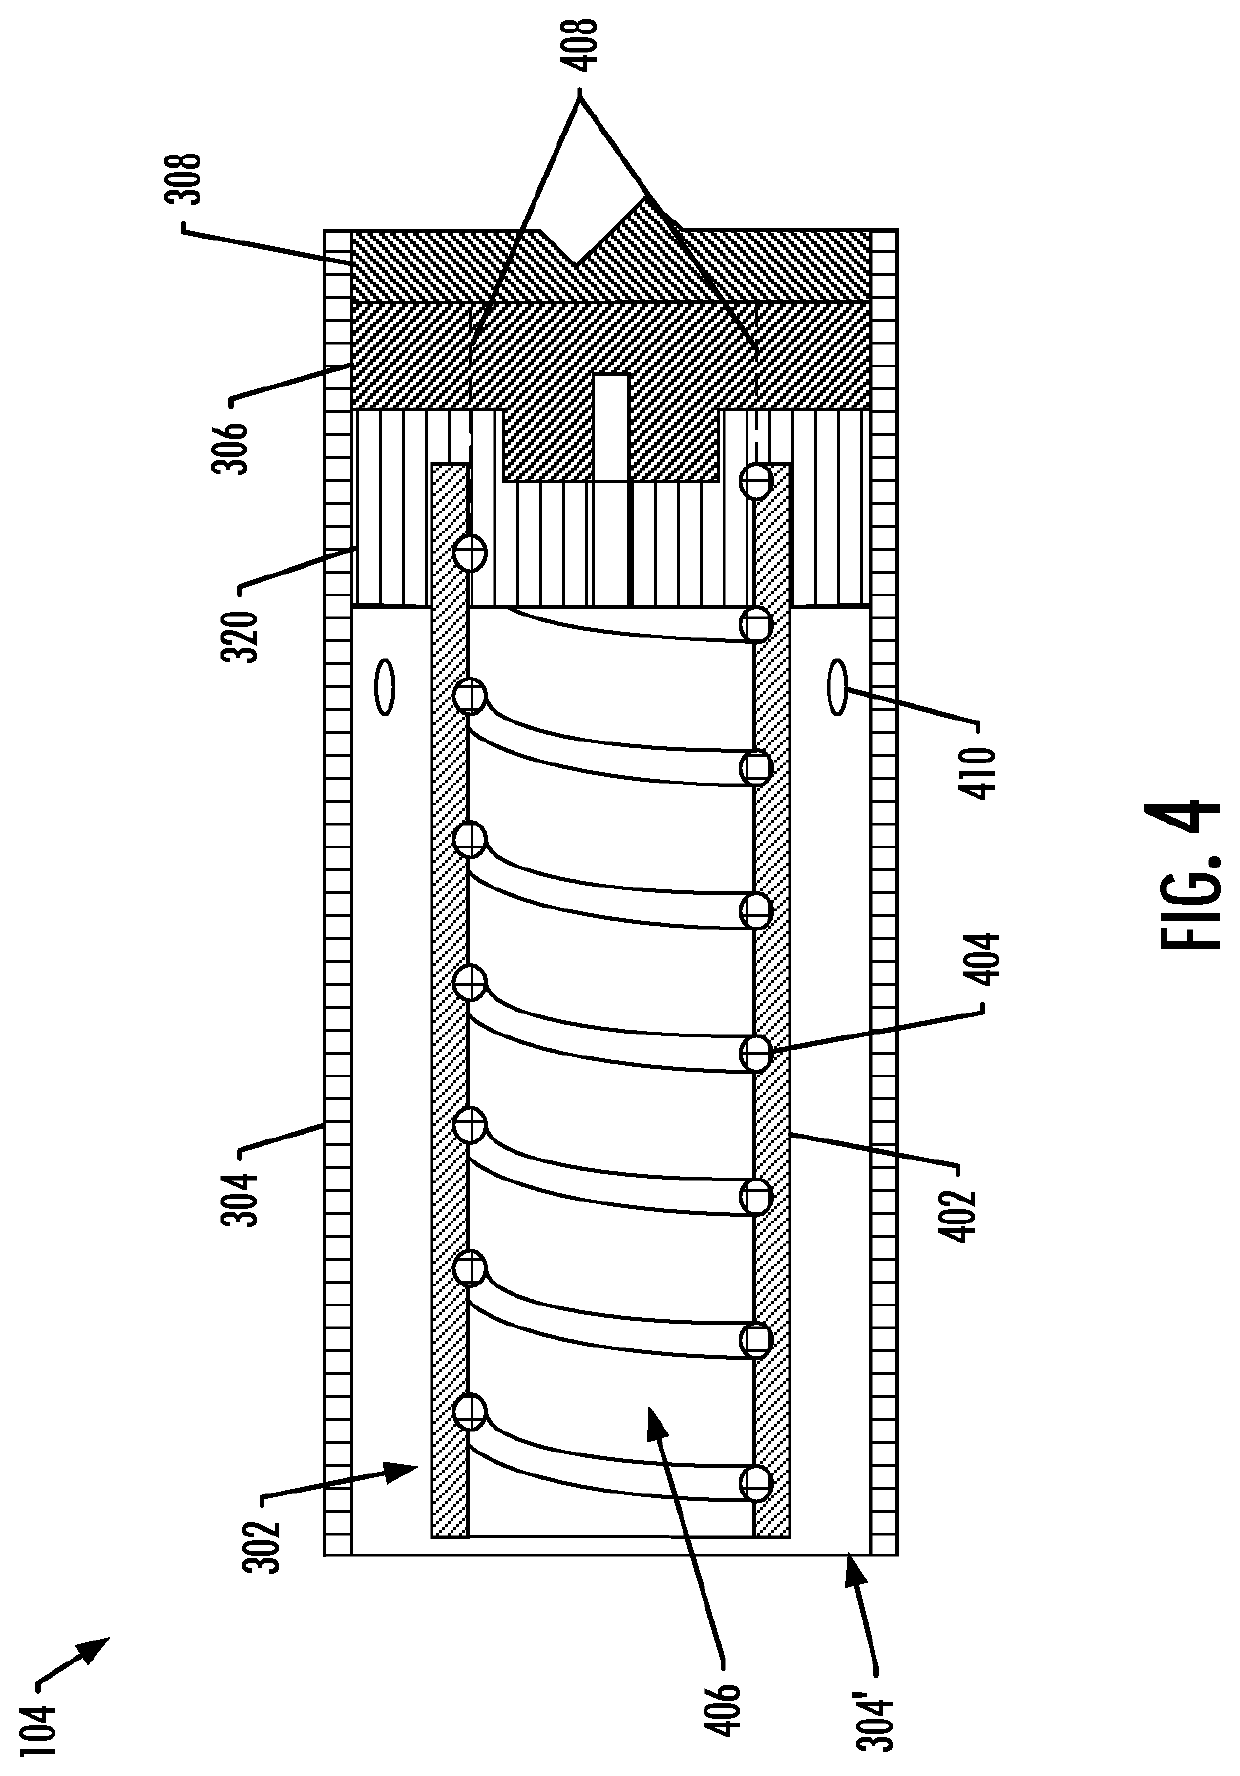 Induction-based aerosol delivery device